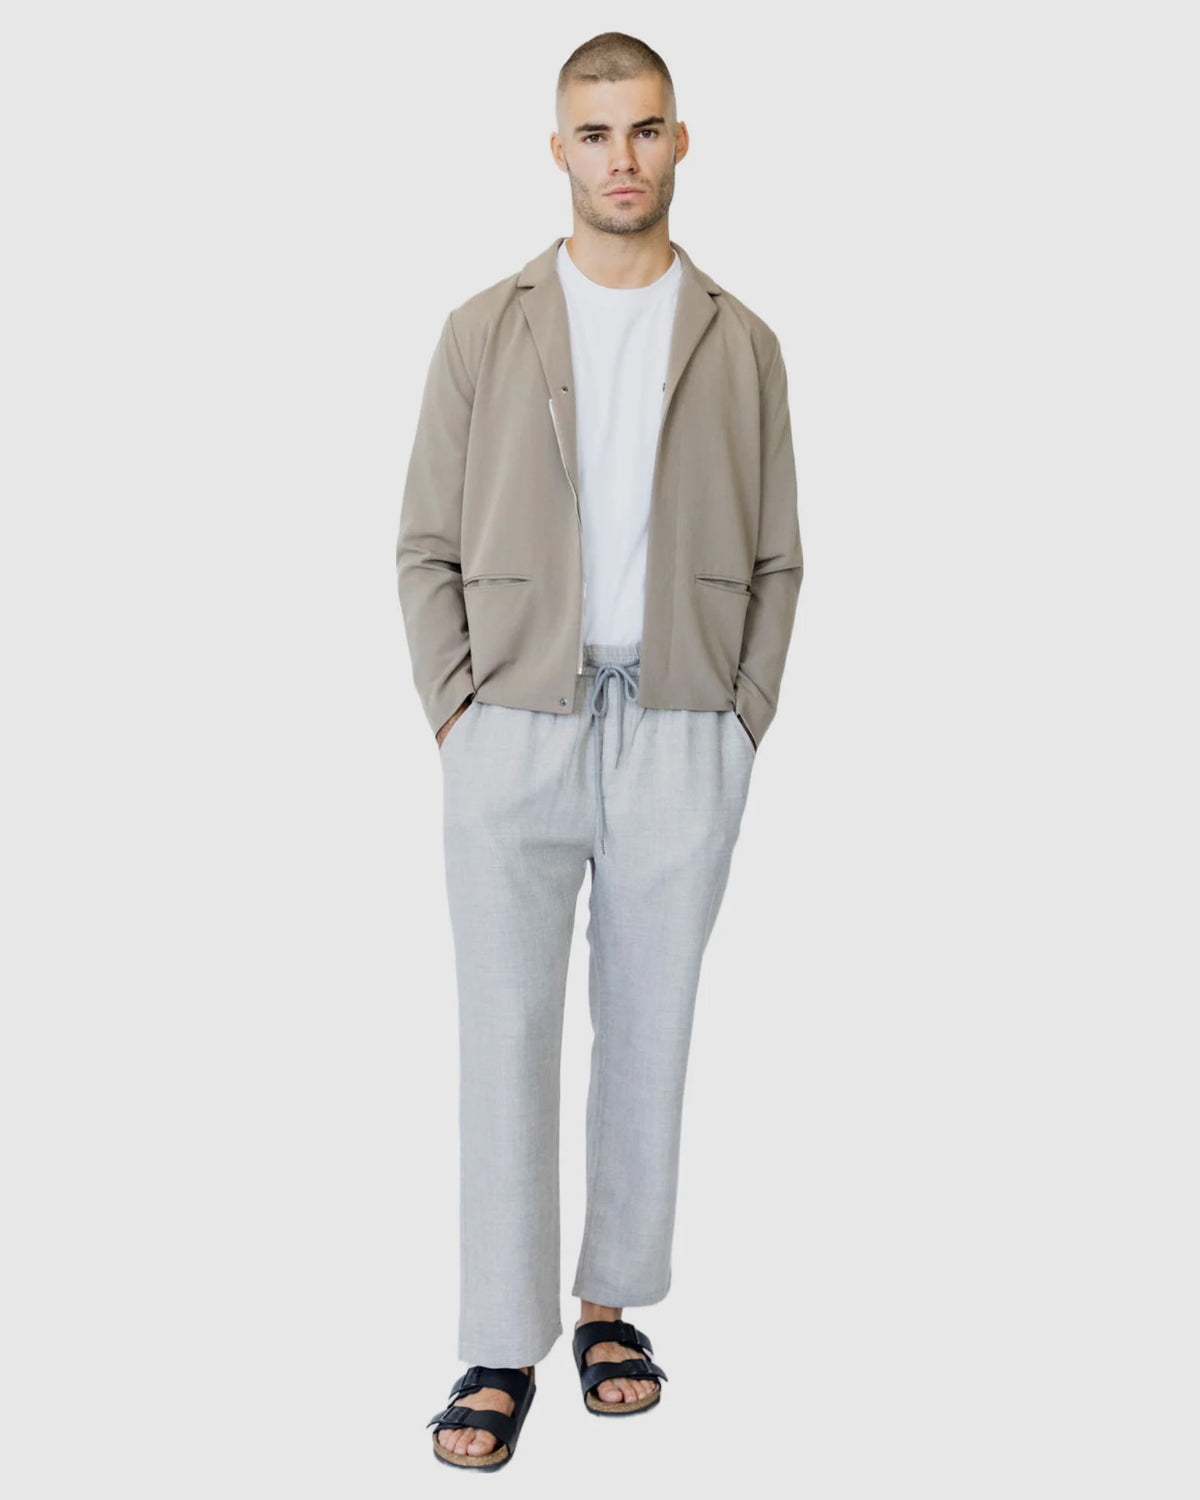 Justin Cassin Zachary Loose Tie Pants in Grey Color 2